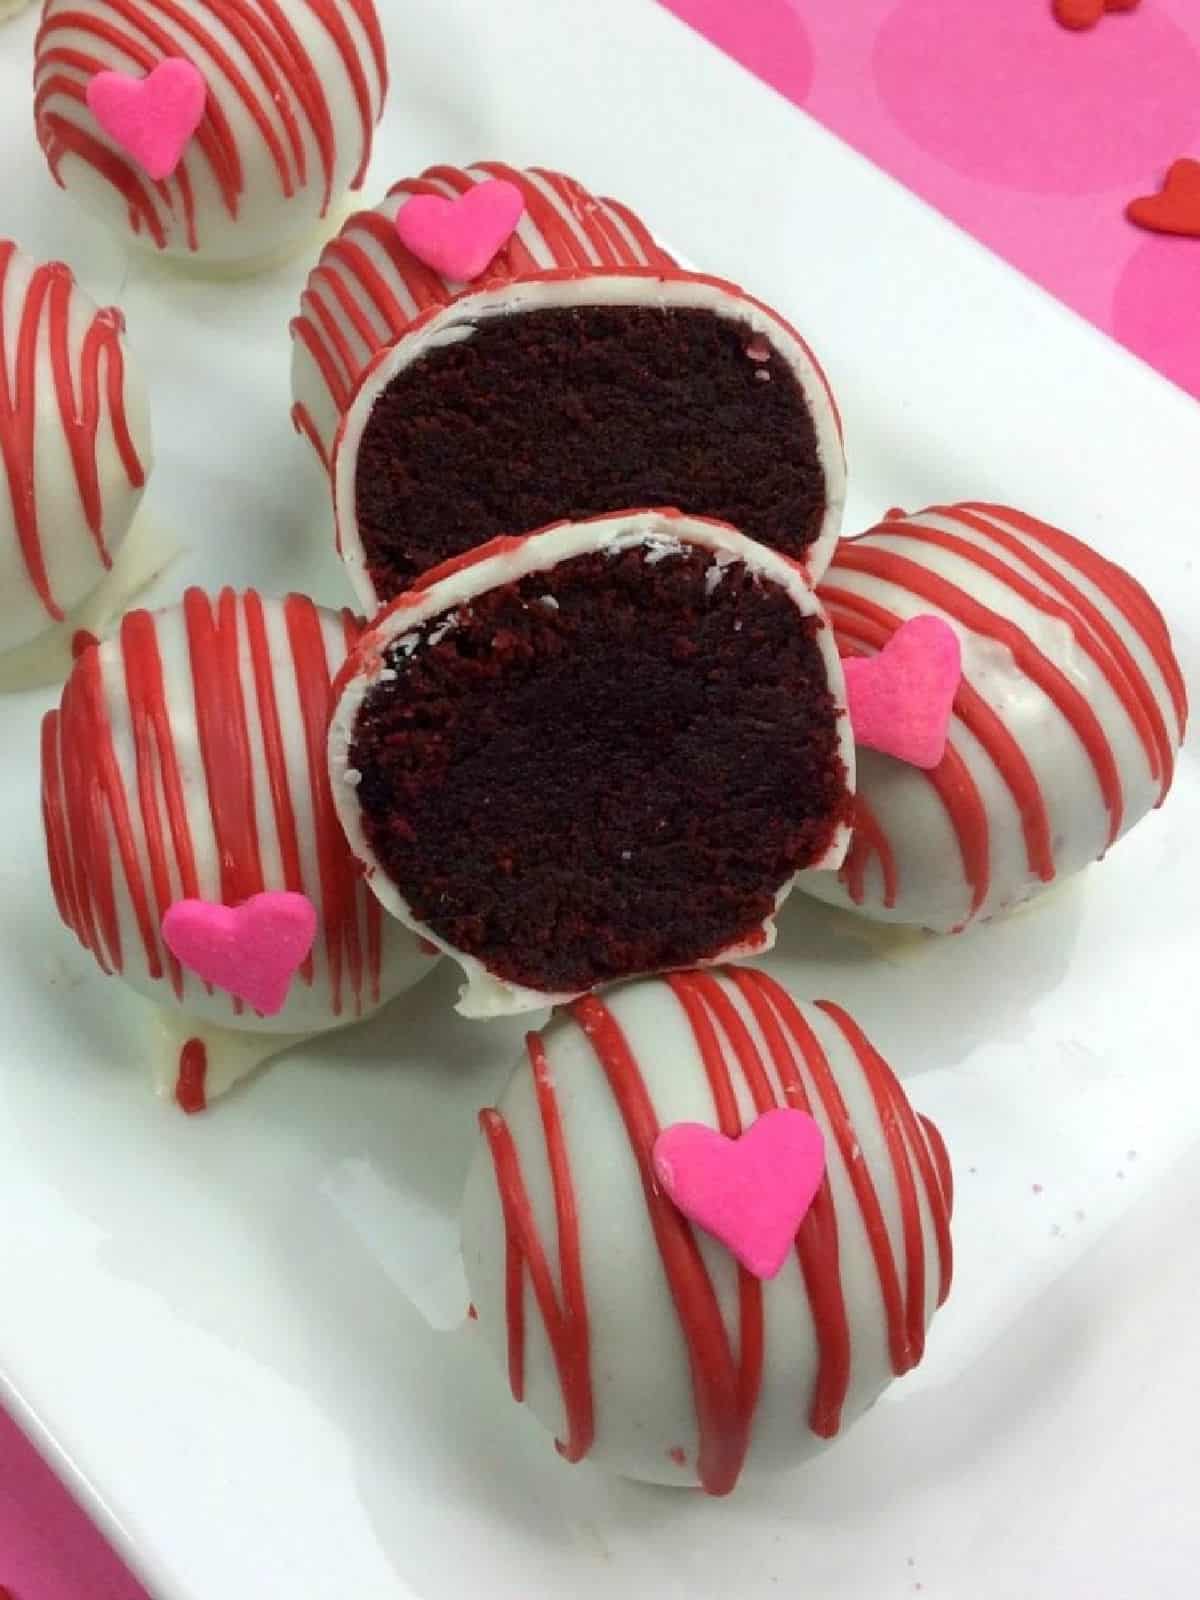 Red velvet cake balls with one cut in half with cake showing.